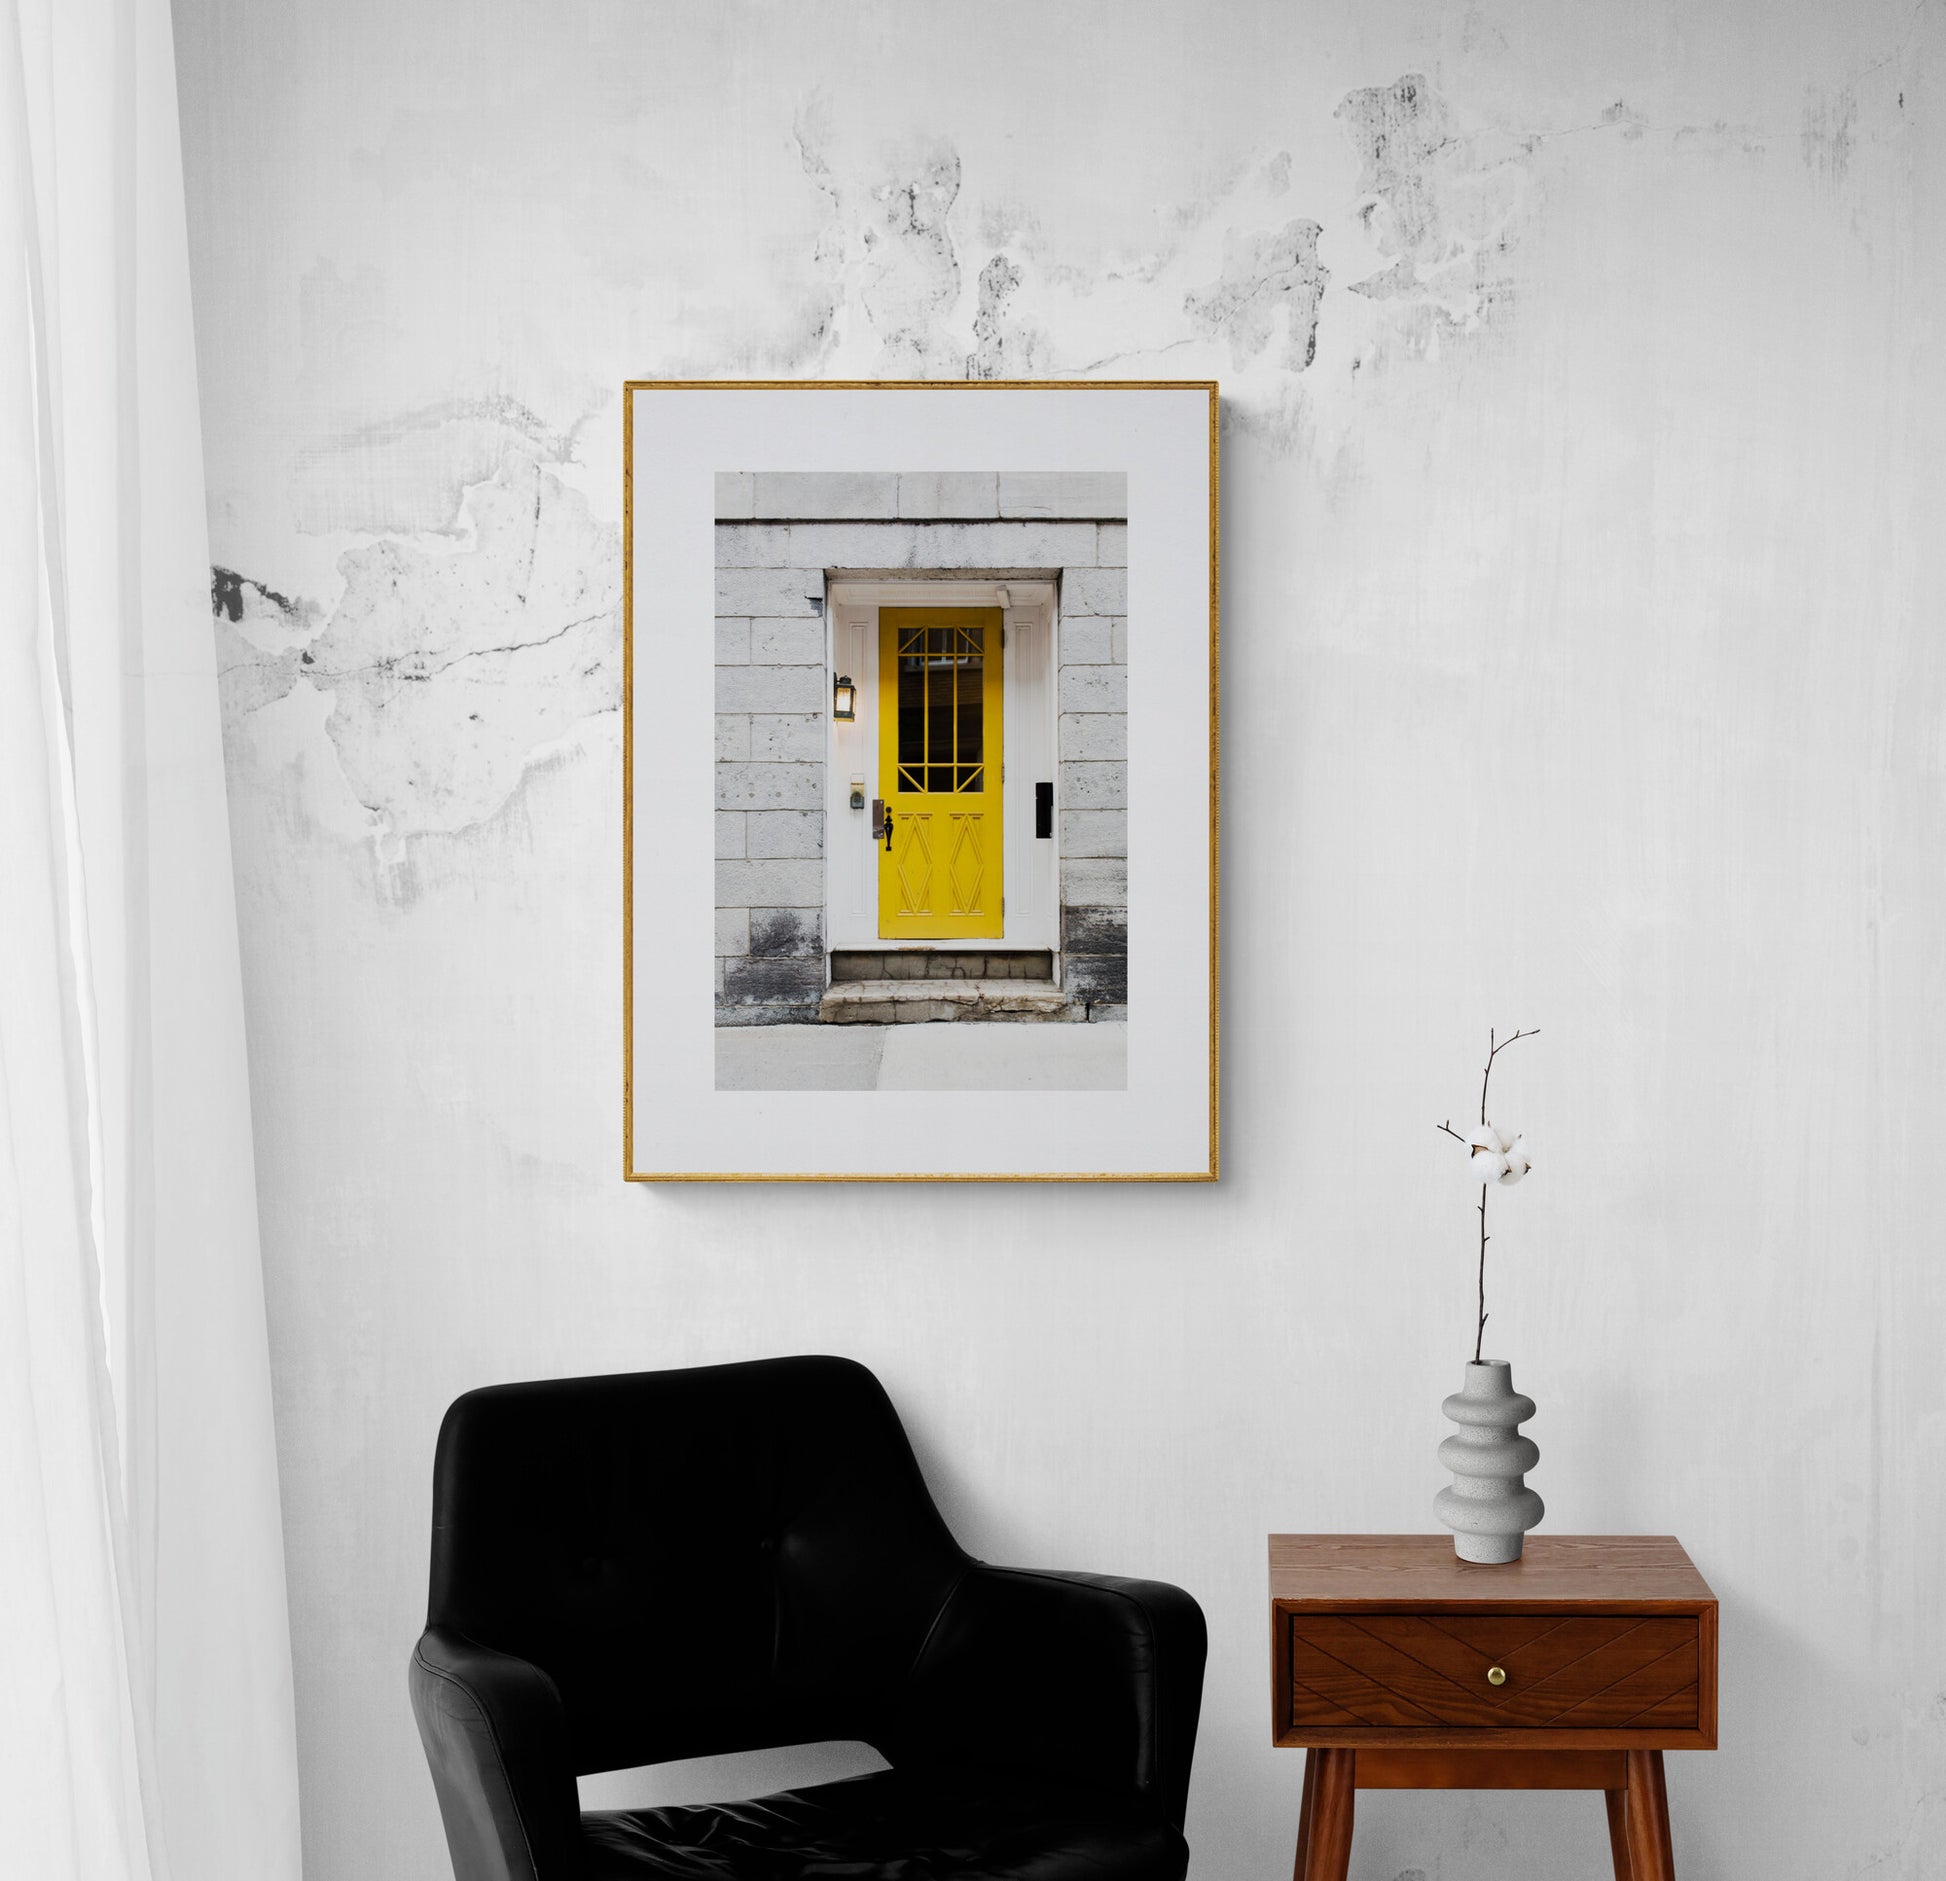 Photograph Print of Yellow Door in Old Quebec City Canada, in a sitting room